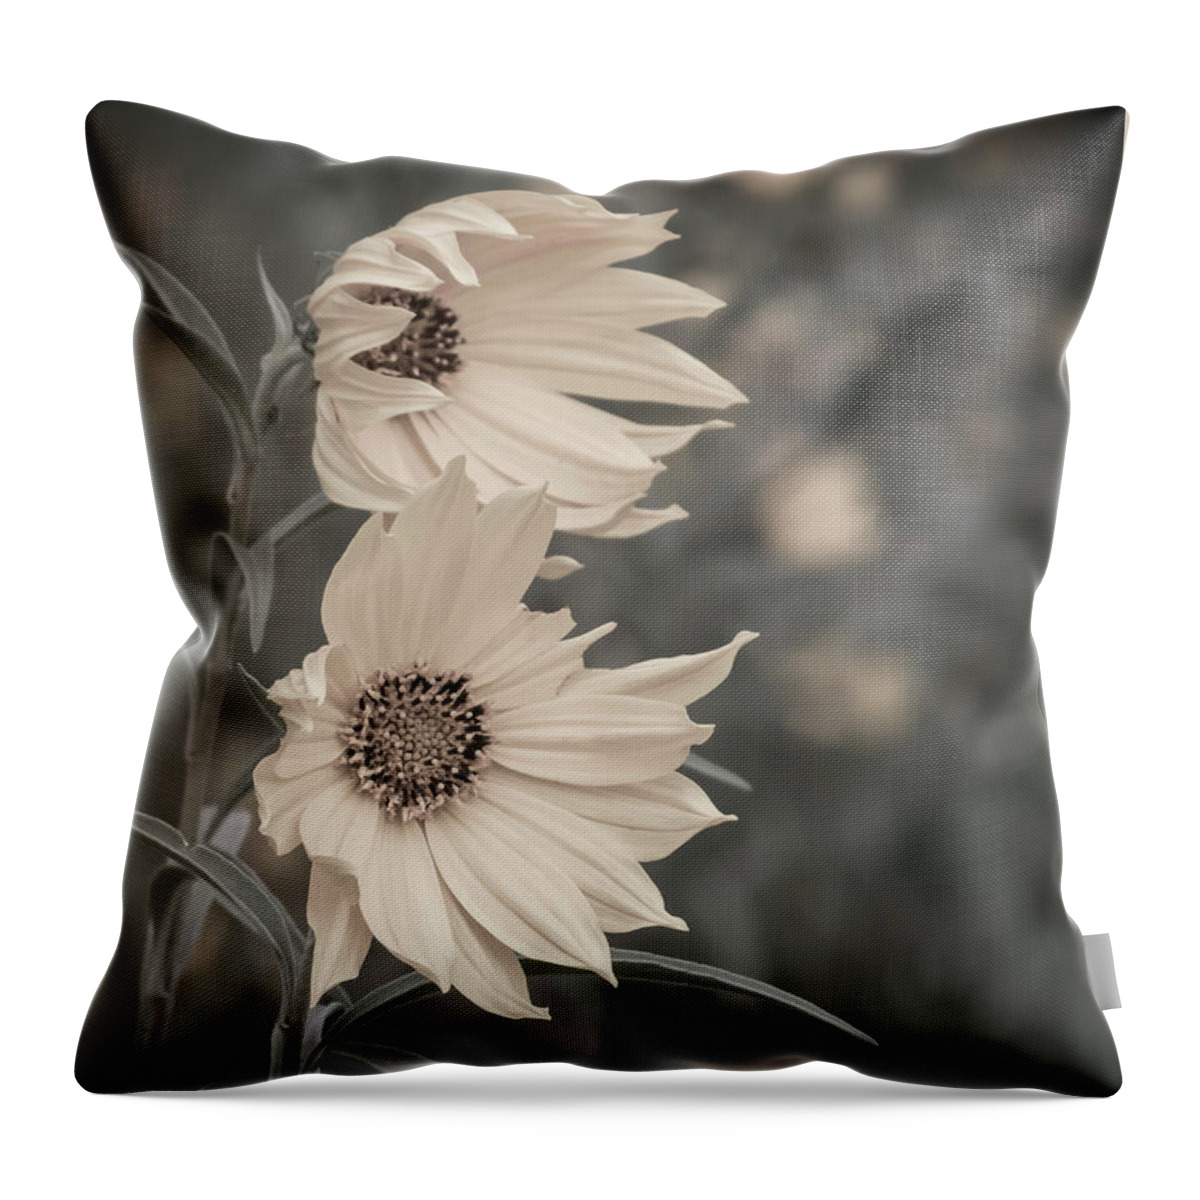 Sunflower Throw Pillow featuring the photograph Windblown Wild Sunflowers by Patti Deters